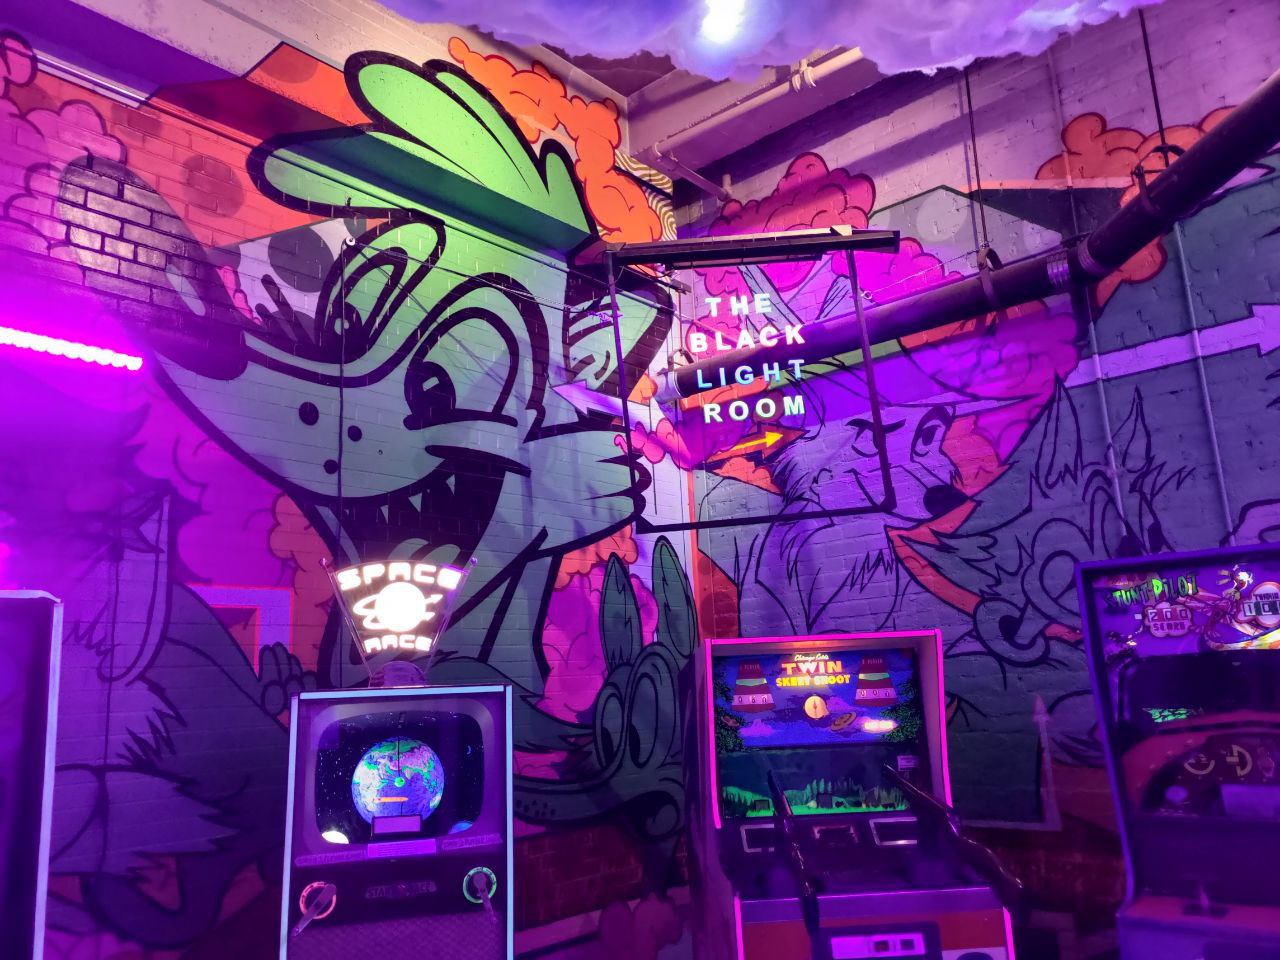 A photo from the back room of Can Can Wonderland, called The Black Light Room. The only light in this room is from blacklight bulbs. Arcade machines stand along the wall, which has been painted various shades of purples, greens, and oranges. The wall is a floor-to-ceiling mural of differerent cartoon foxes, including Disney's Robin Hood